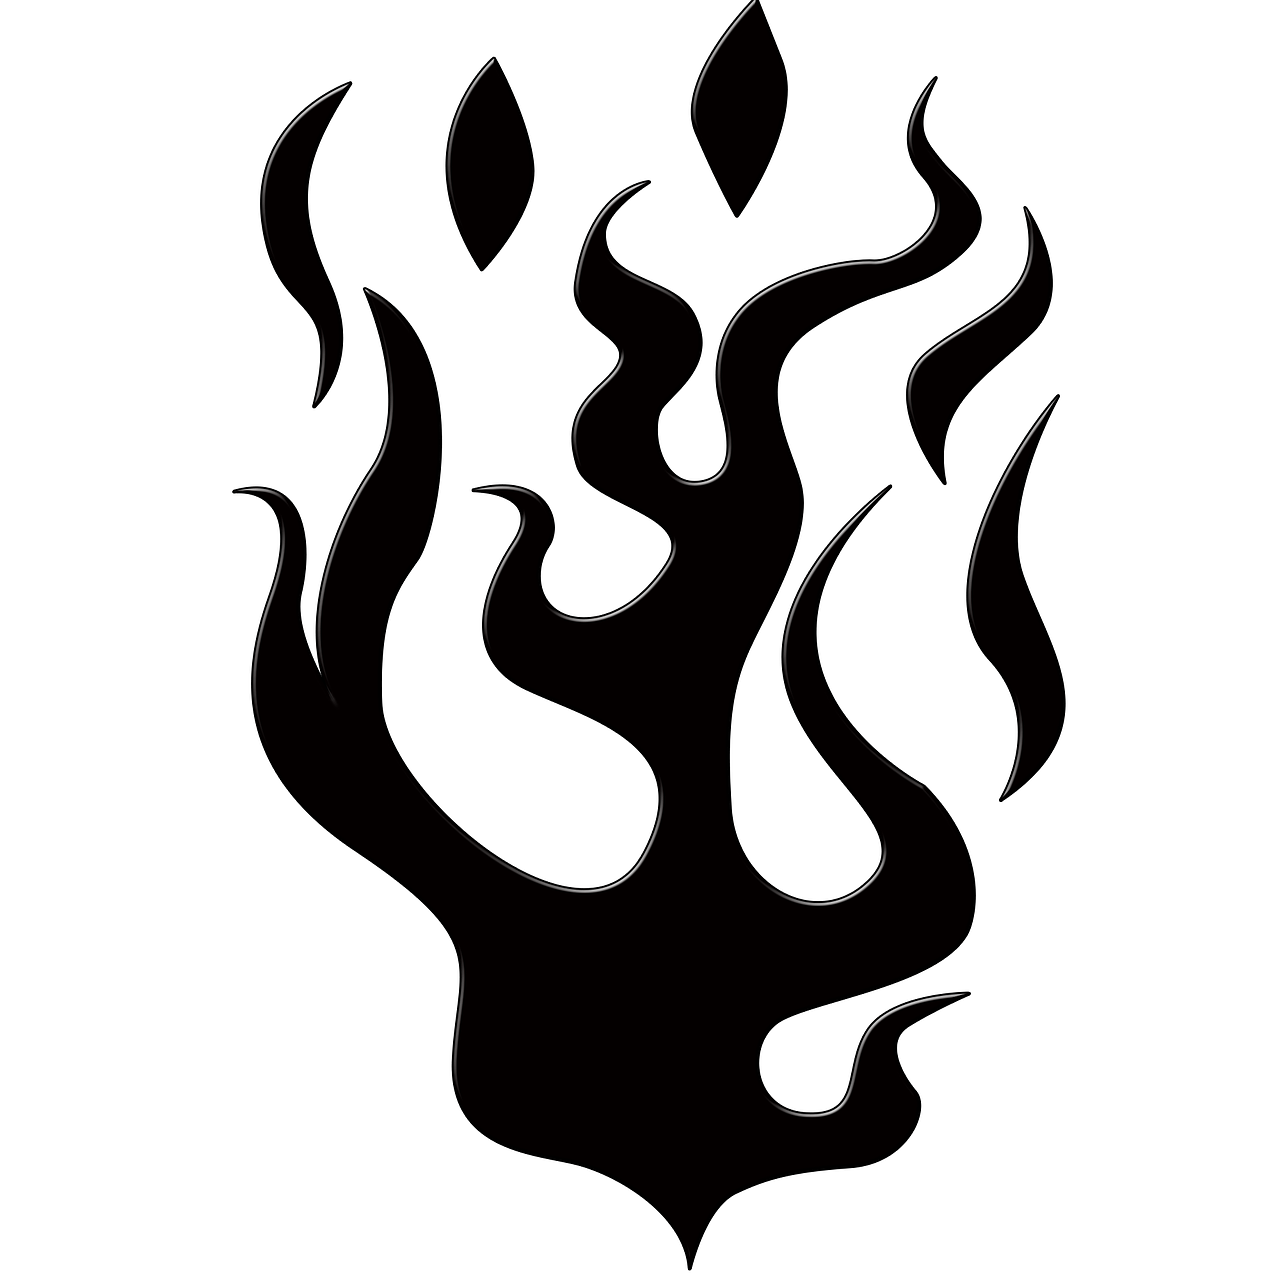 Download free photo of Flames,silhouette,shape,fire,art - from needpix.com